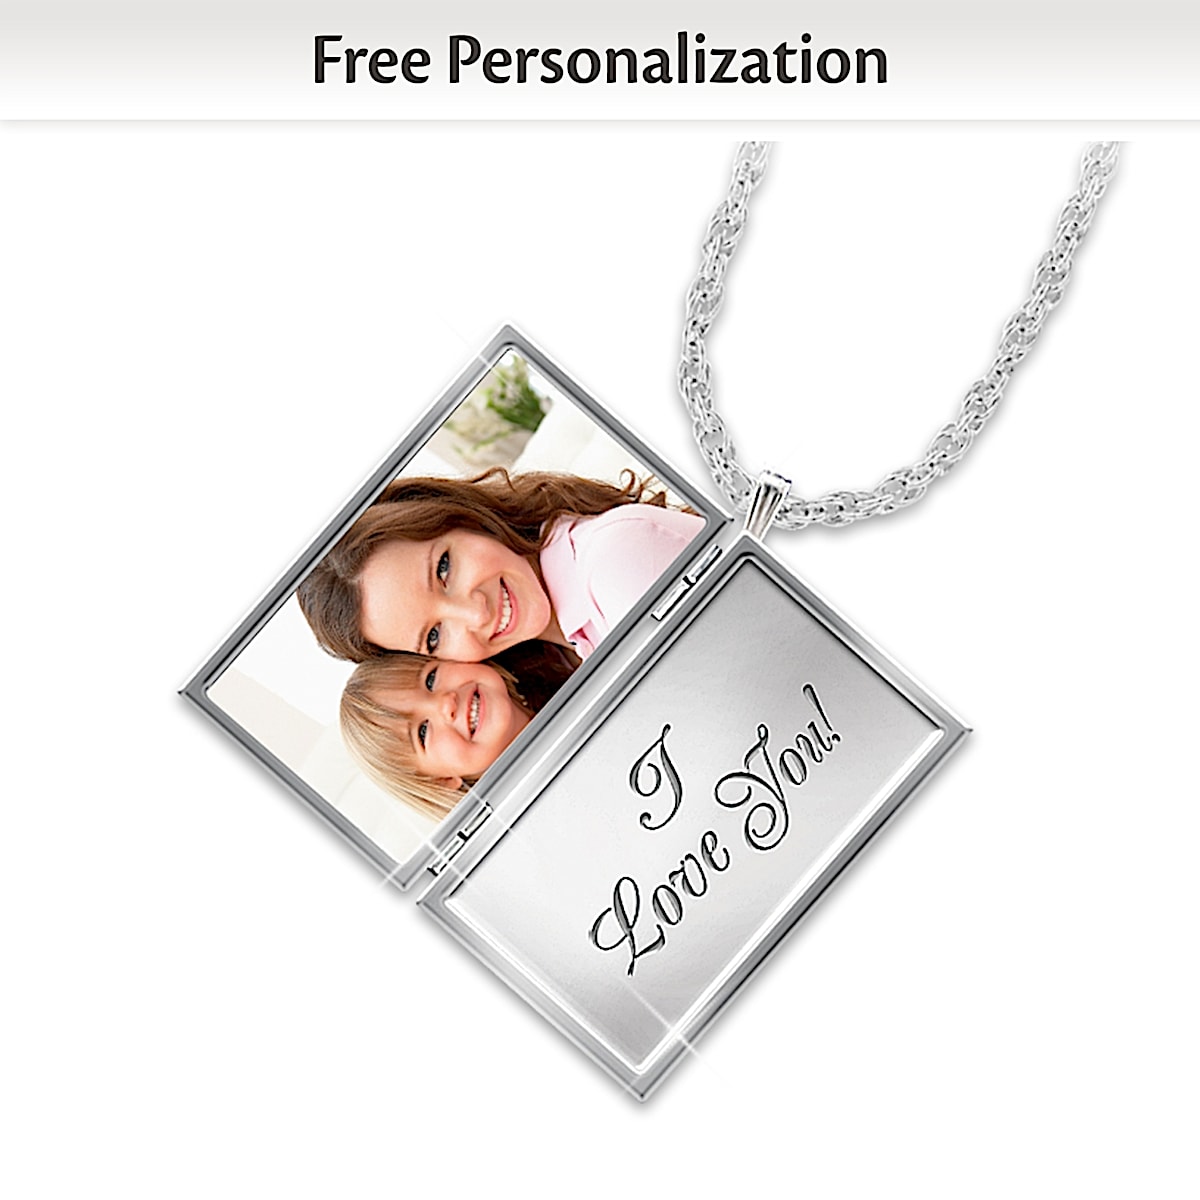 Fanery sue Heart Locket Necklace That Holds Pictures, Customized Photo Necklaces  Personalized Lockets with Picture inside, Rose/Lotus/Flower Photos Pendant  Custom Jewelry Gifts for Women Men, Stainless Steel, No Gemstone :  Amazon.in: Fashion